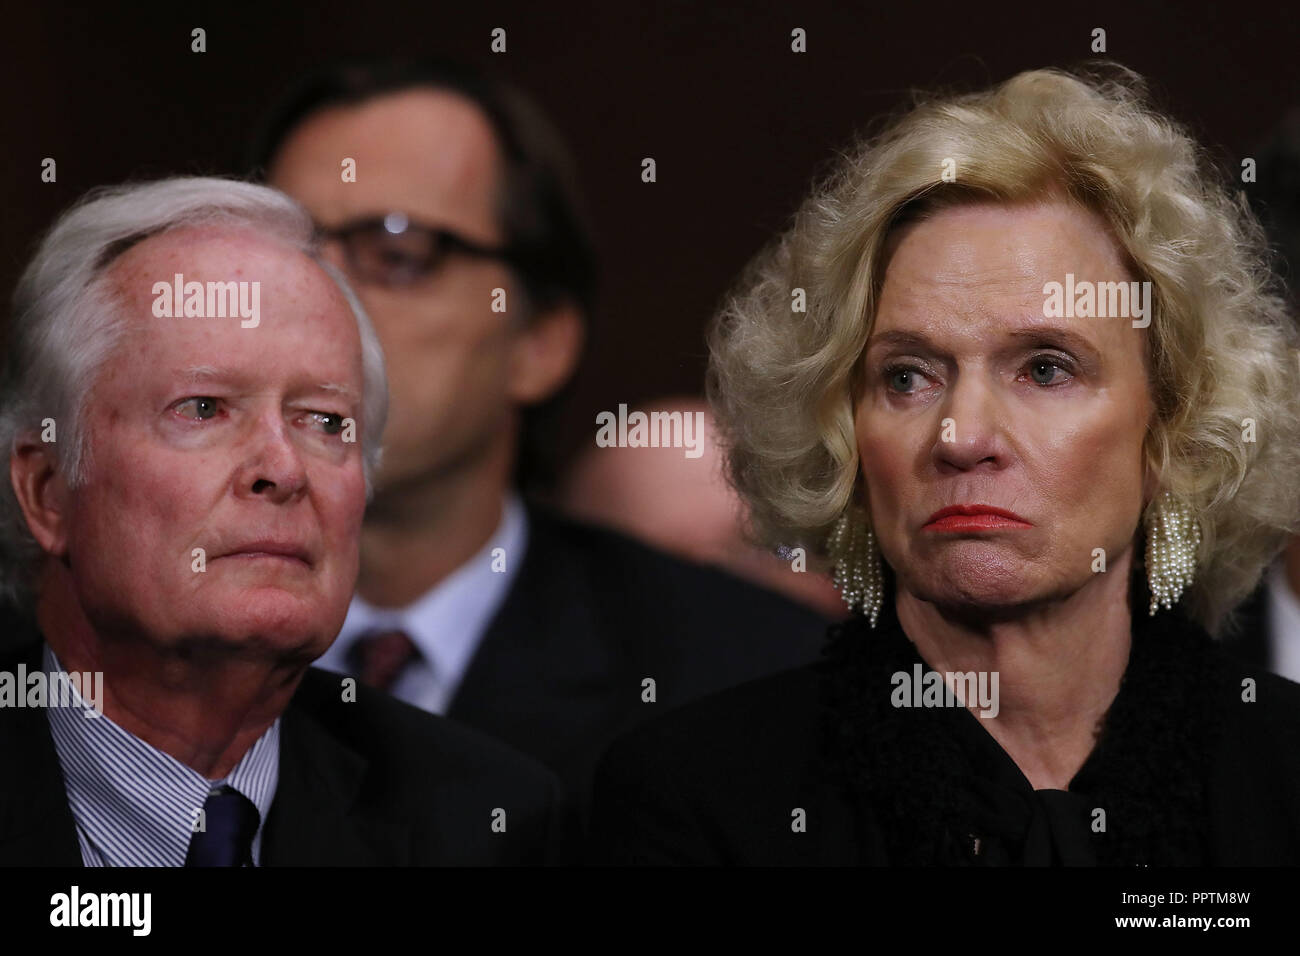 WASHINGTON, DC - SEPTEMBER 27:  Judge Brett Kavanaugh's parents, Everett and Martha Kavanaugh, listen to their son testify before the Senate Judiciary Committee during his Supreme Court confirmation hearing in the Dirksen Senate Office Building on Capitol Hill September 27, 2018 in Washington, DC. Kavanaugh was called back to testify about claims by Christine Blasey Ford, who has accused him of sexually assaulting her during a party in 1982 when they were high school students in suburban Maryland.  (Photo by Win McNamee/Getty Images) | usage worldwide Stock Photo